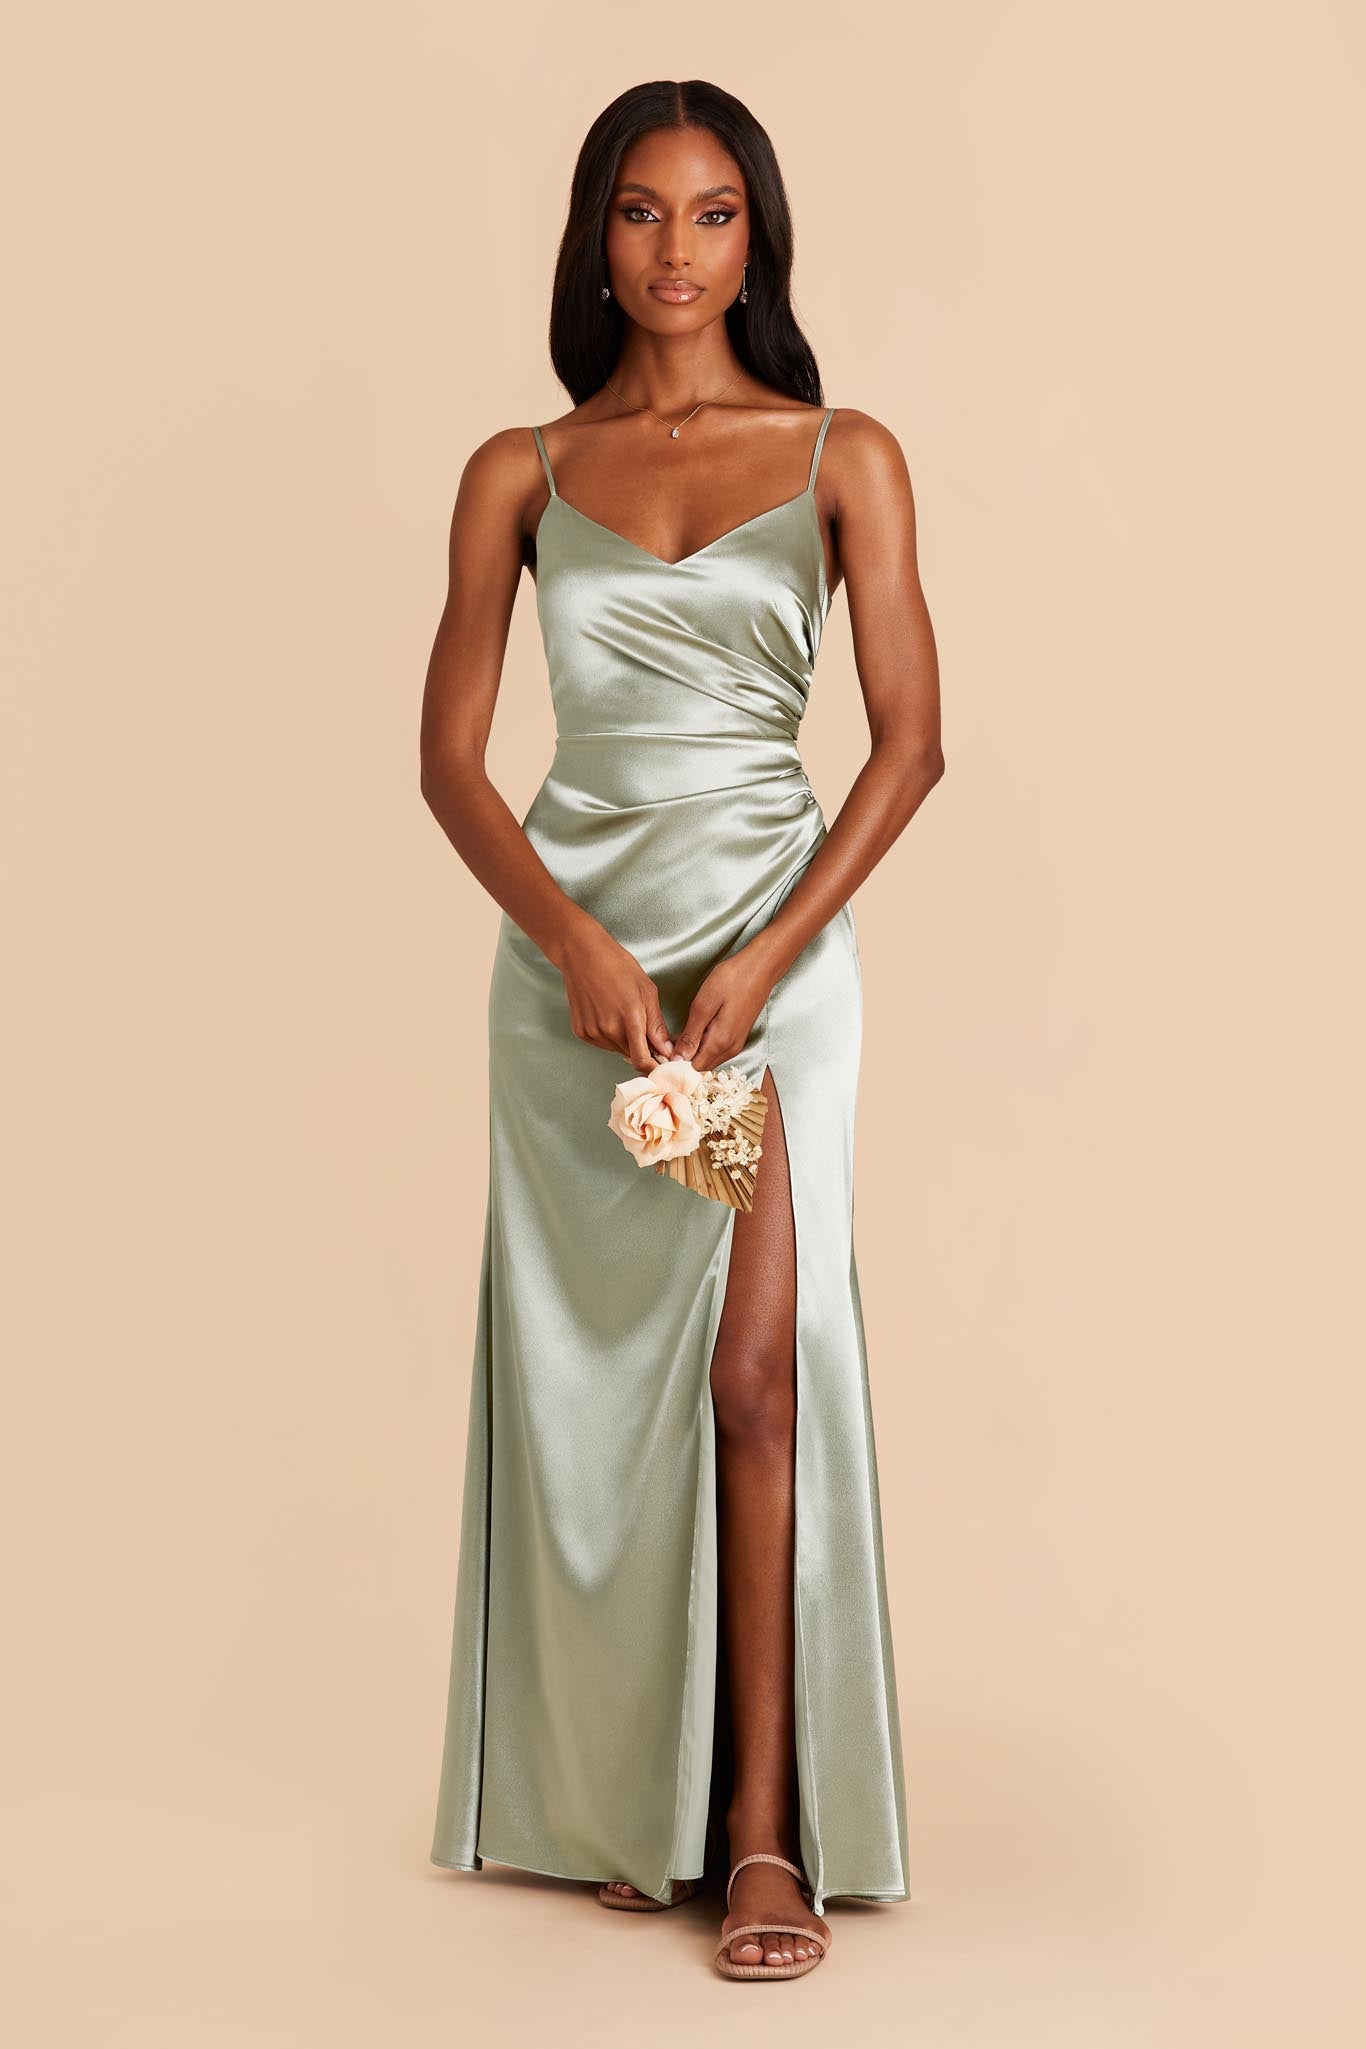 Green Bridesmaid Dresses: The Colour Trend of 2023